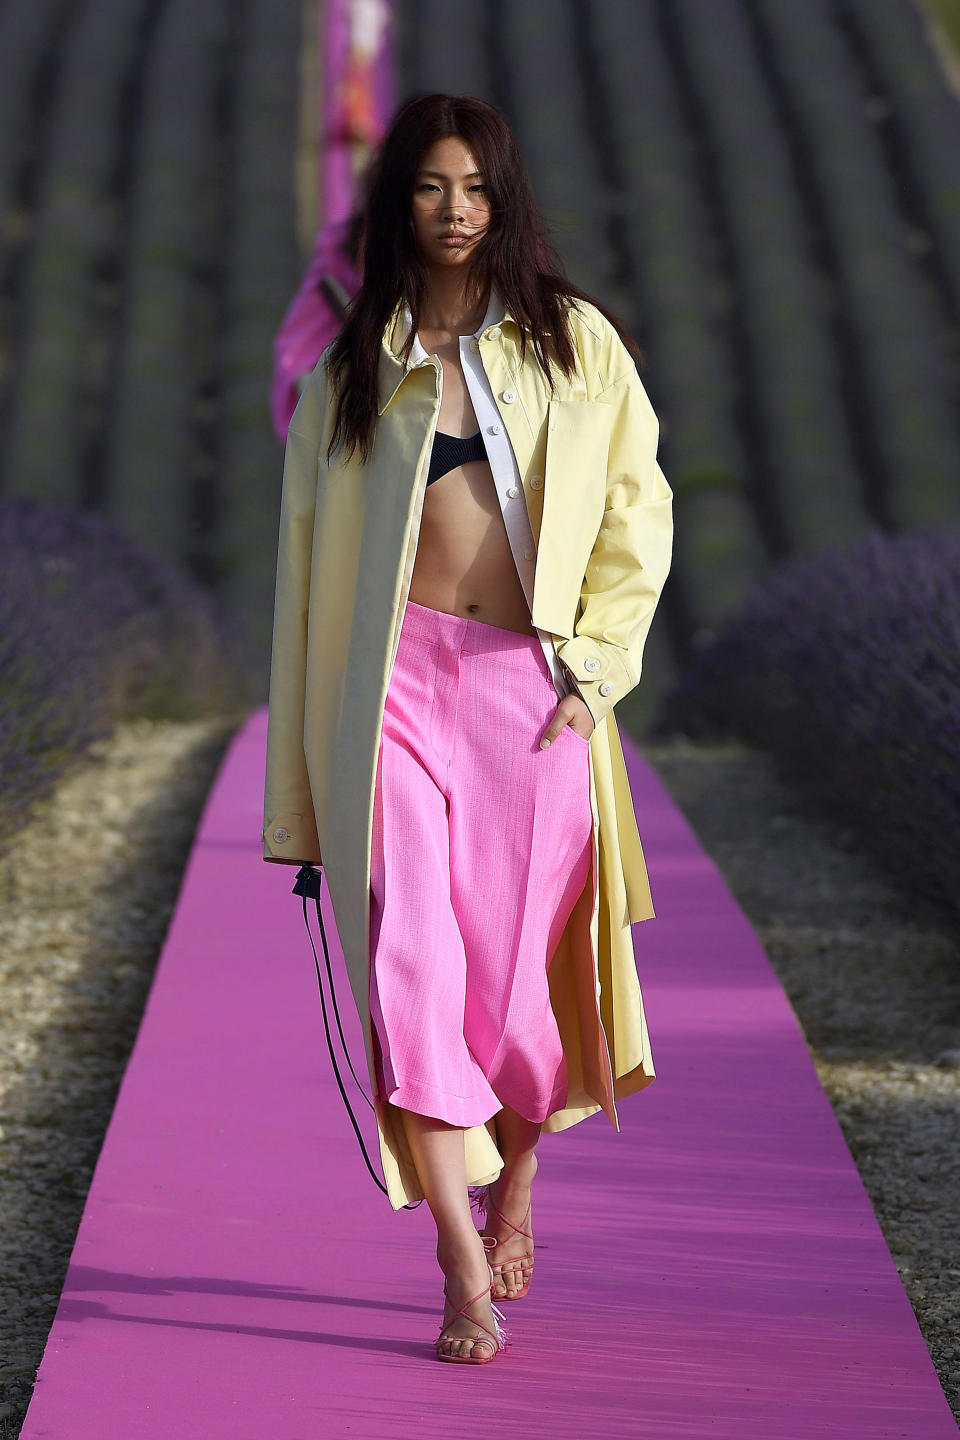 VALENSOLE, FRANCE - JUNE 24: A model walks the runway at the Jacquemus Menswear  Spring/Summer 2020 show on June 24, 2019 in Valensole, France. (Photo by Estrop/Getty Images